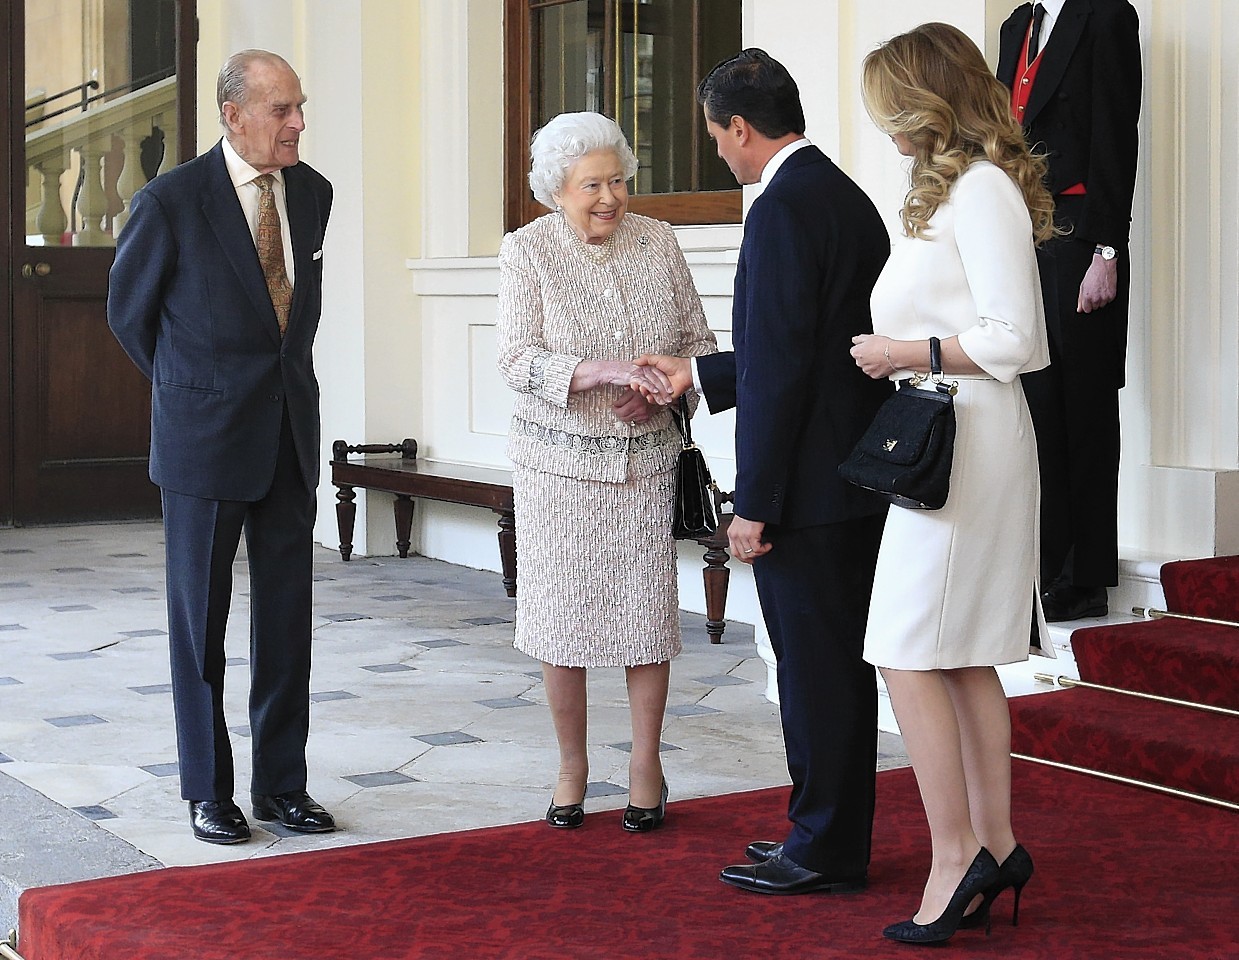 President Nieto also visited the Queen on his trip to the UK 